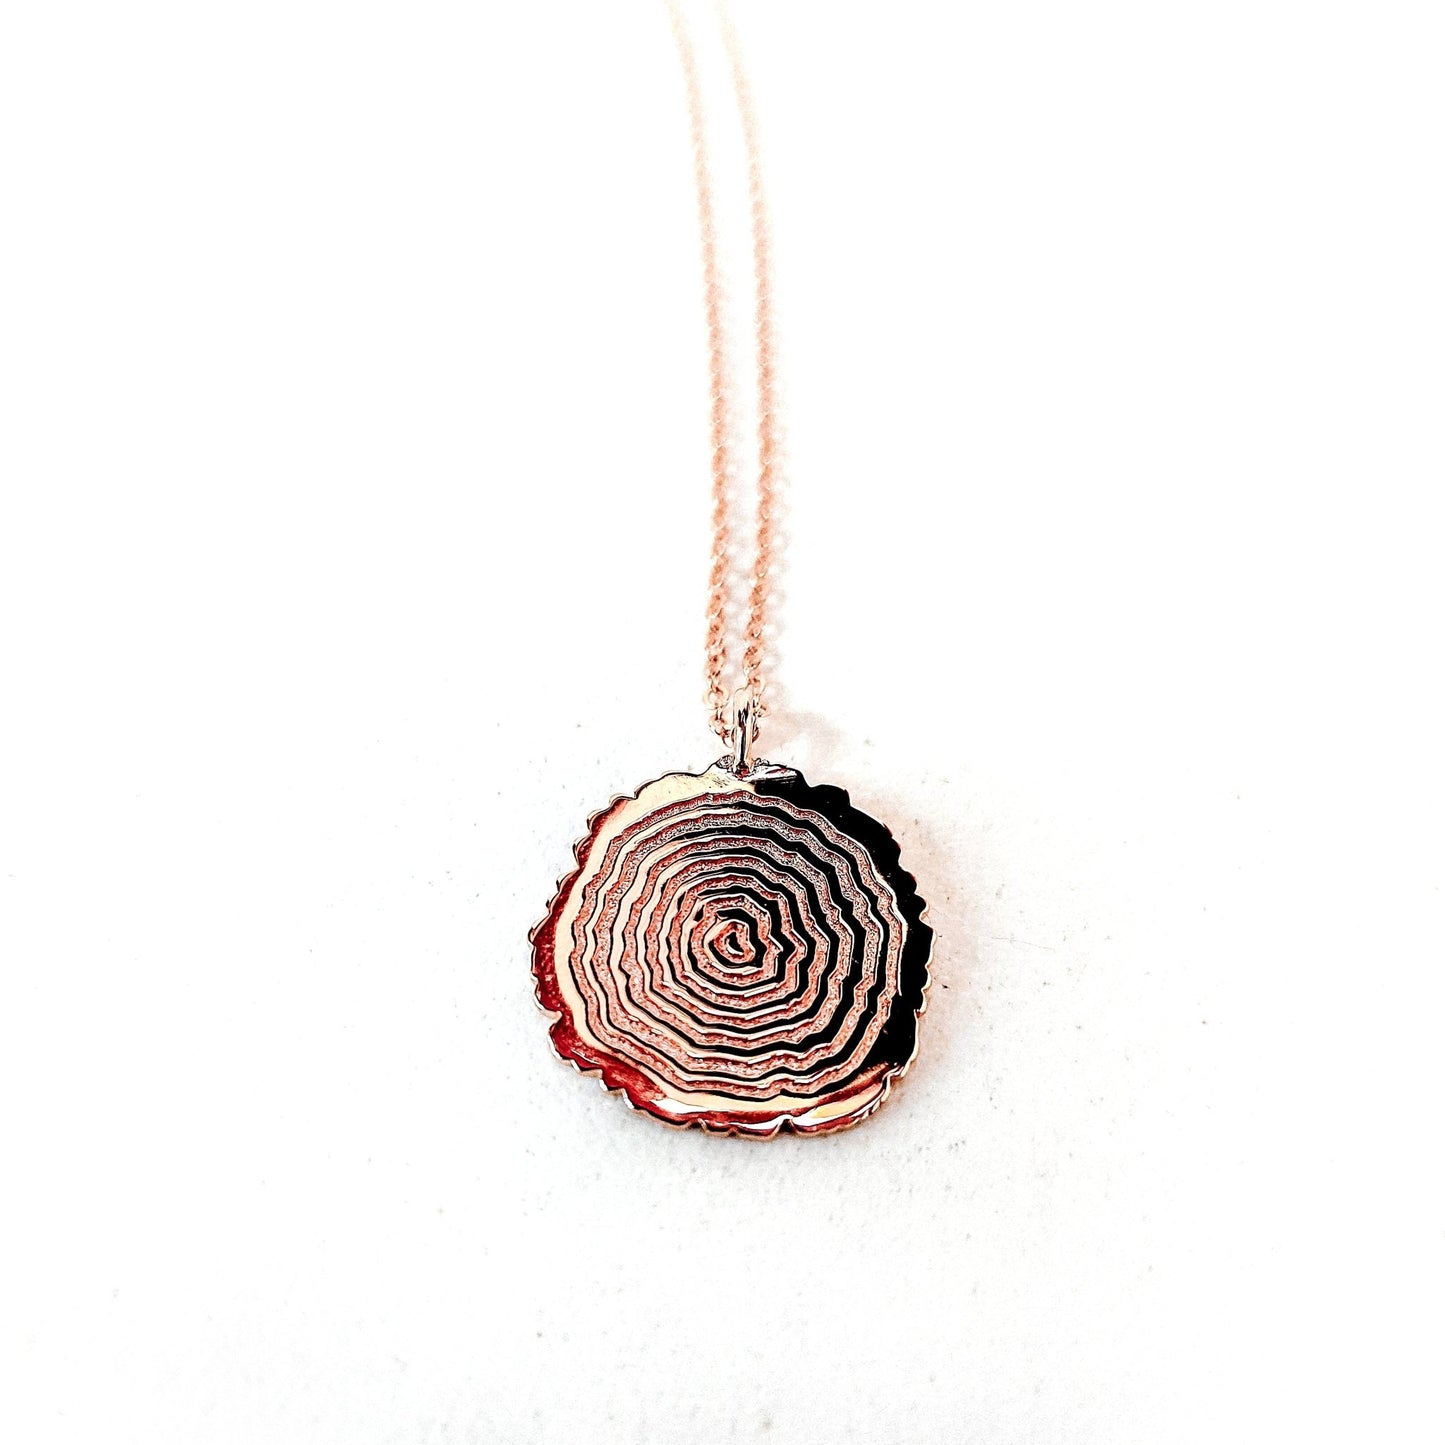 18k rose gold  plated sterling silver vita tree rings design with center heart pendant necklace on white background